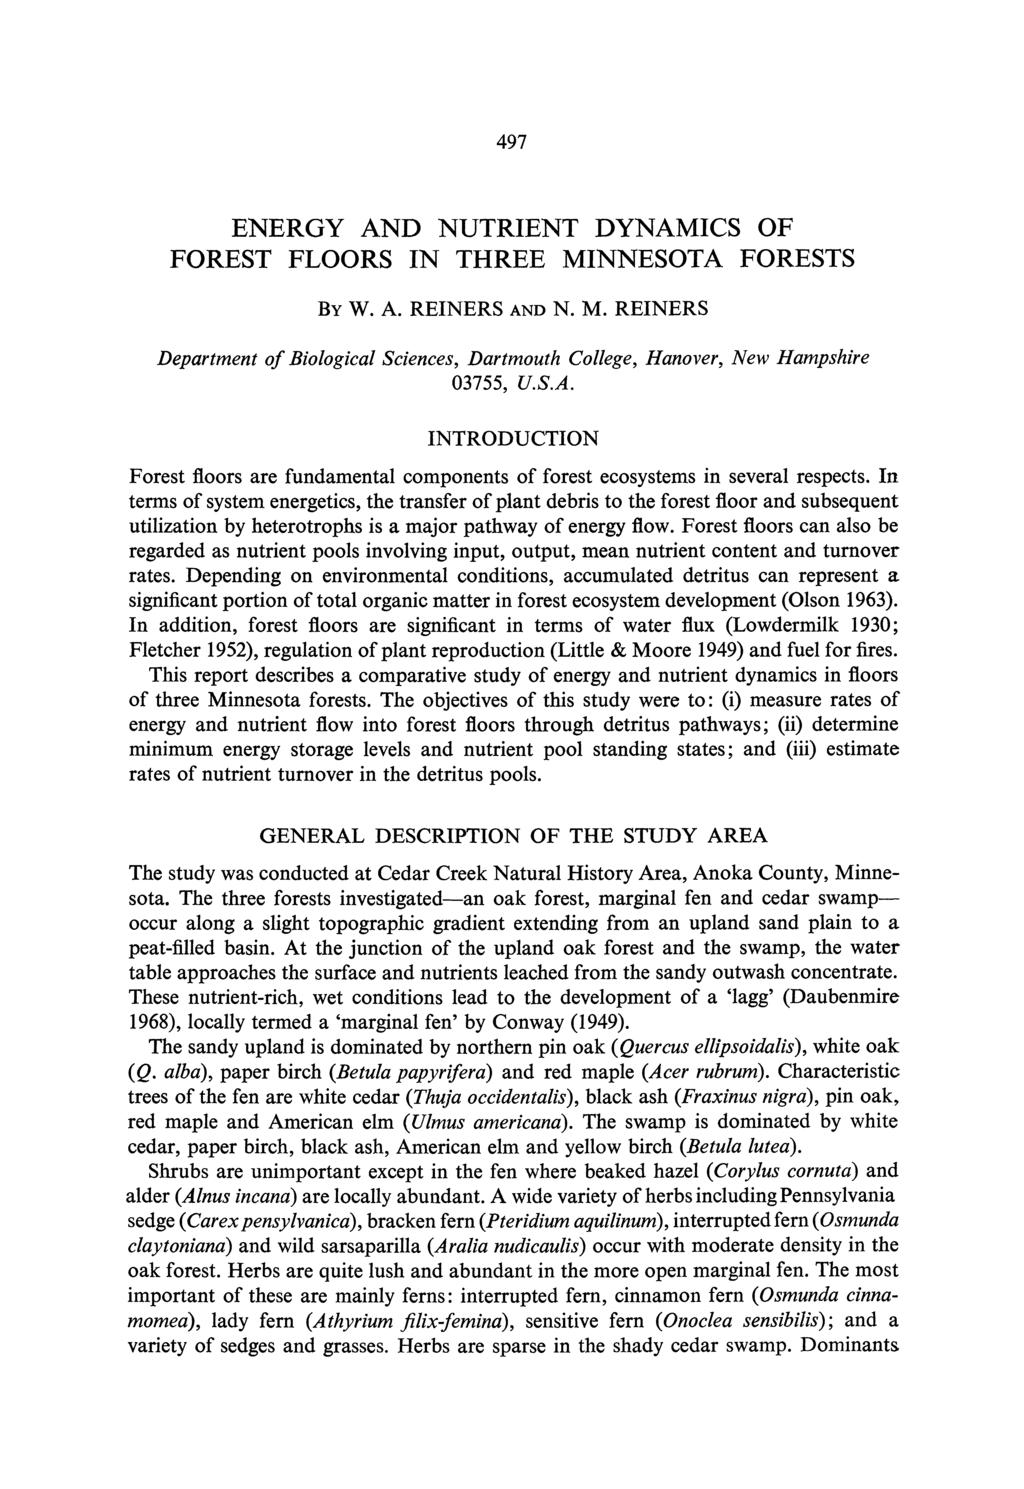 497 ENERGY AND NUTRIENT DYNAMICS OF FOREST FLOORS IN THREE MINNESOTA FORESTS BY W. A. REINERS AND N. M. REINERS Department of Biological Sciences, Dartmouth College, Hanover, New Hampshire 03755, U.S.A. INTRODUCTION Forest floors are fundamental components of forest ecosystems in several respects.